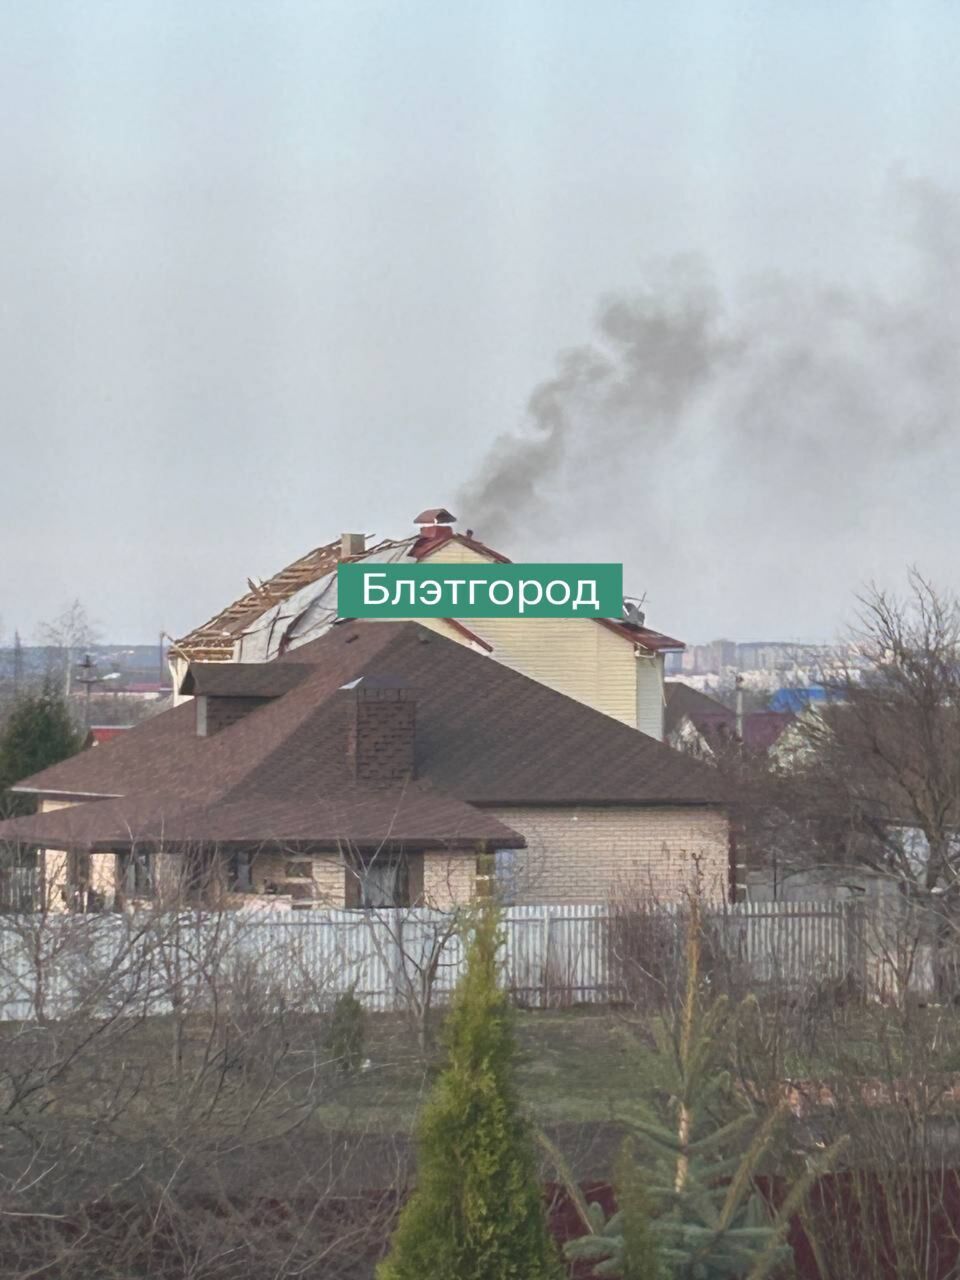 After the fighting in Ukraine, explosions occurred in the Russian city of Belgorod. Photos and video